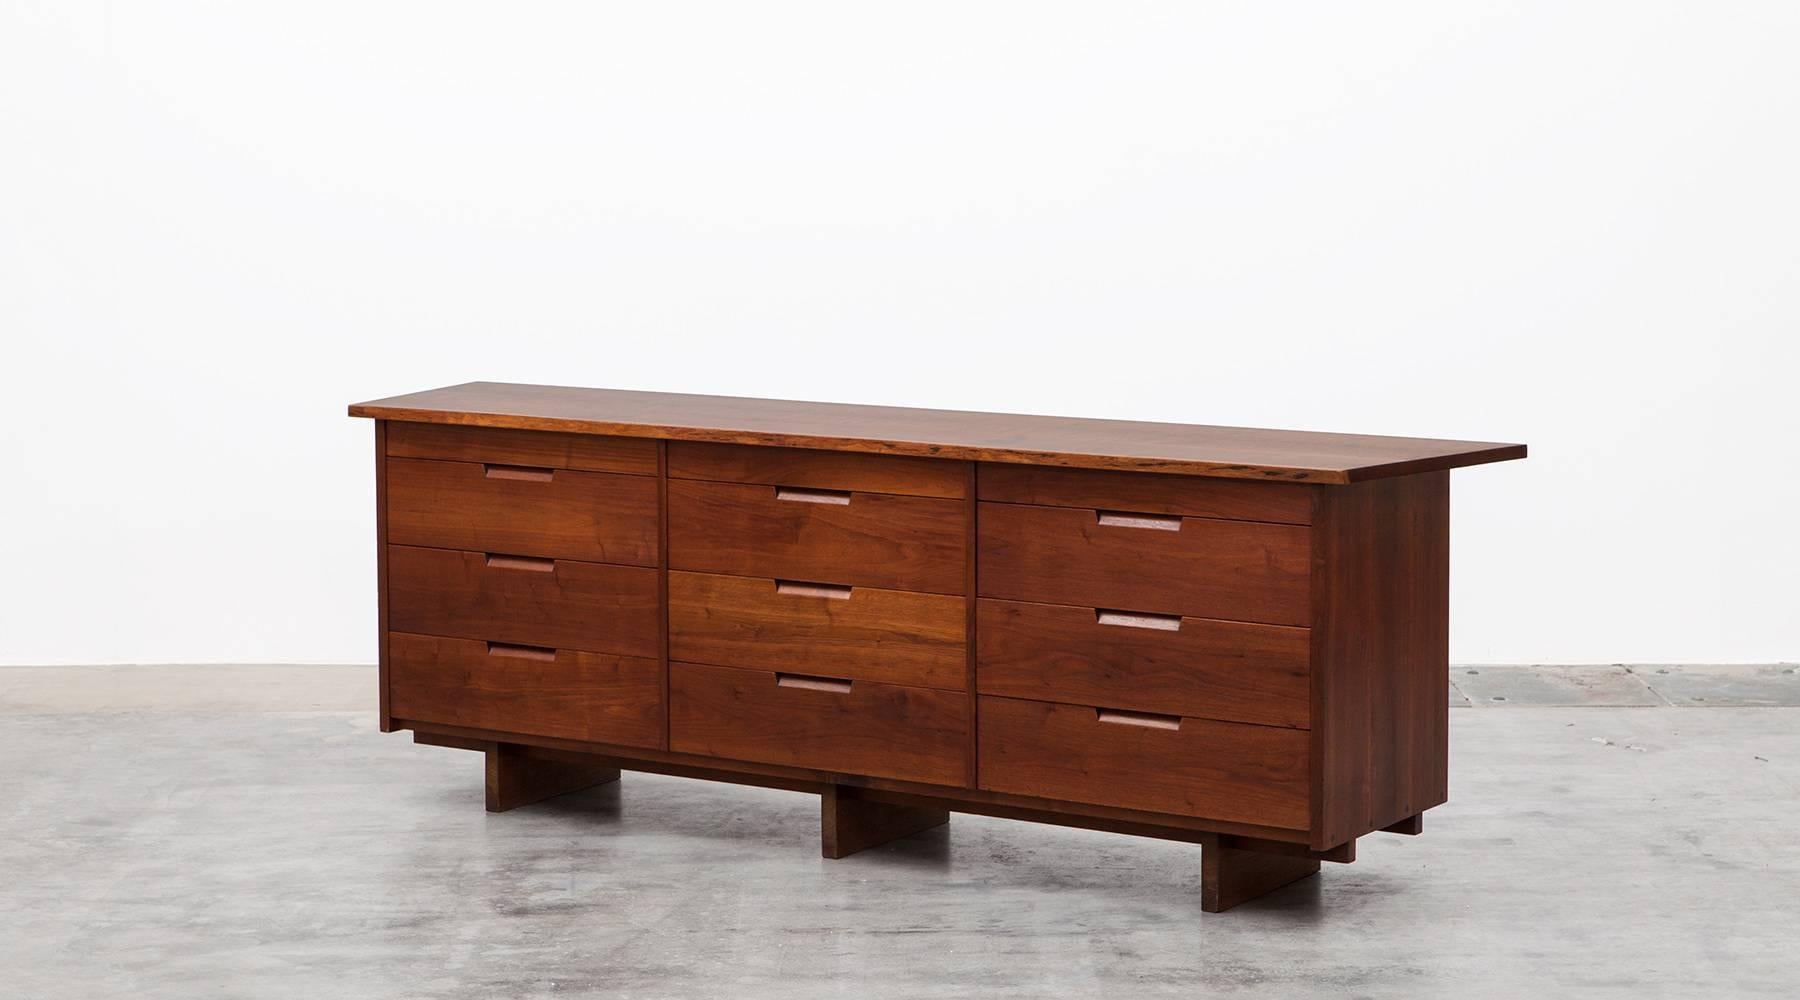 Handcrafted sideboard designed by famous American George Nakashima. It is constructed with American black walnut and contains nine drawers with sufficient storage space. Graceful in proportion, it is one of the great examples of Nakashima's